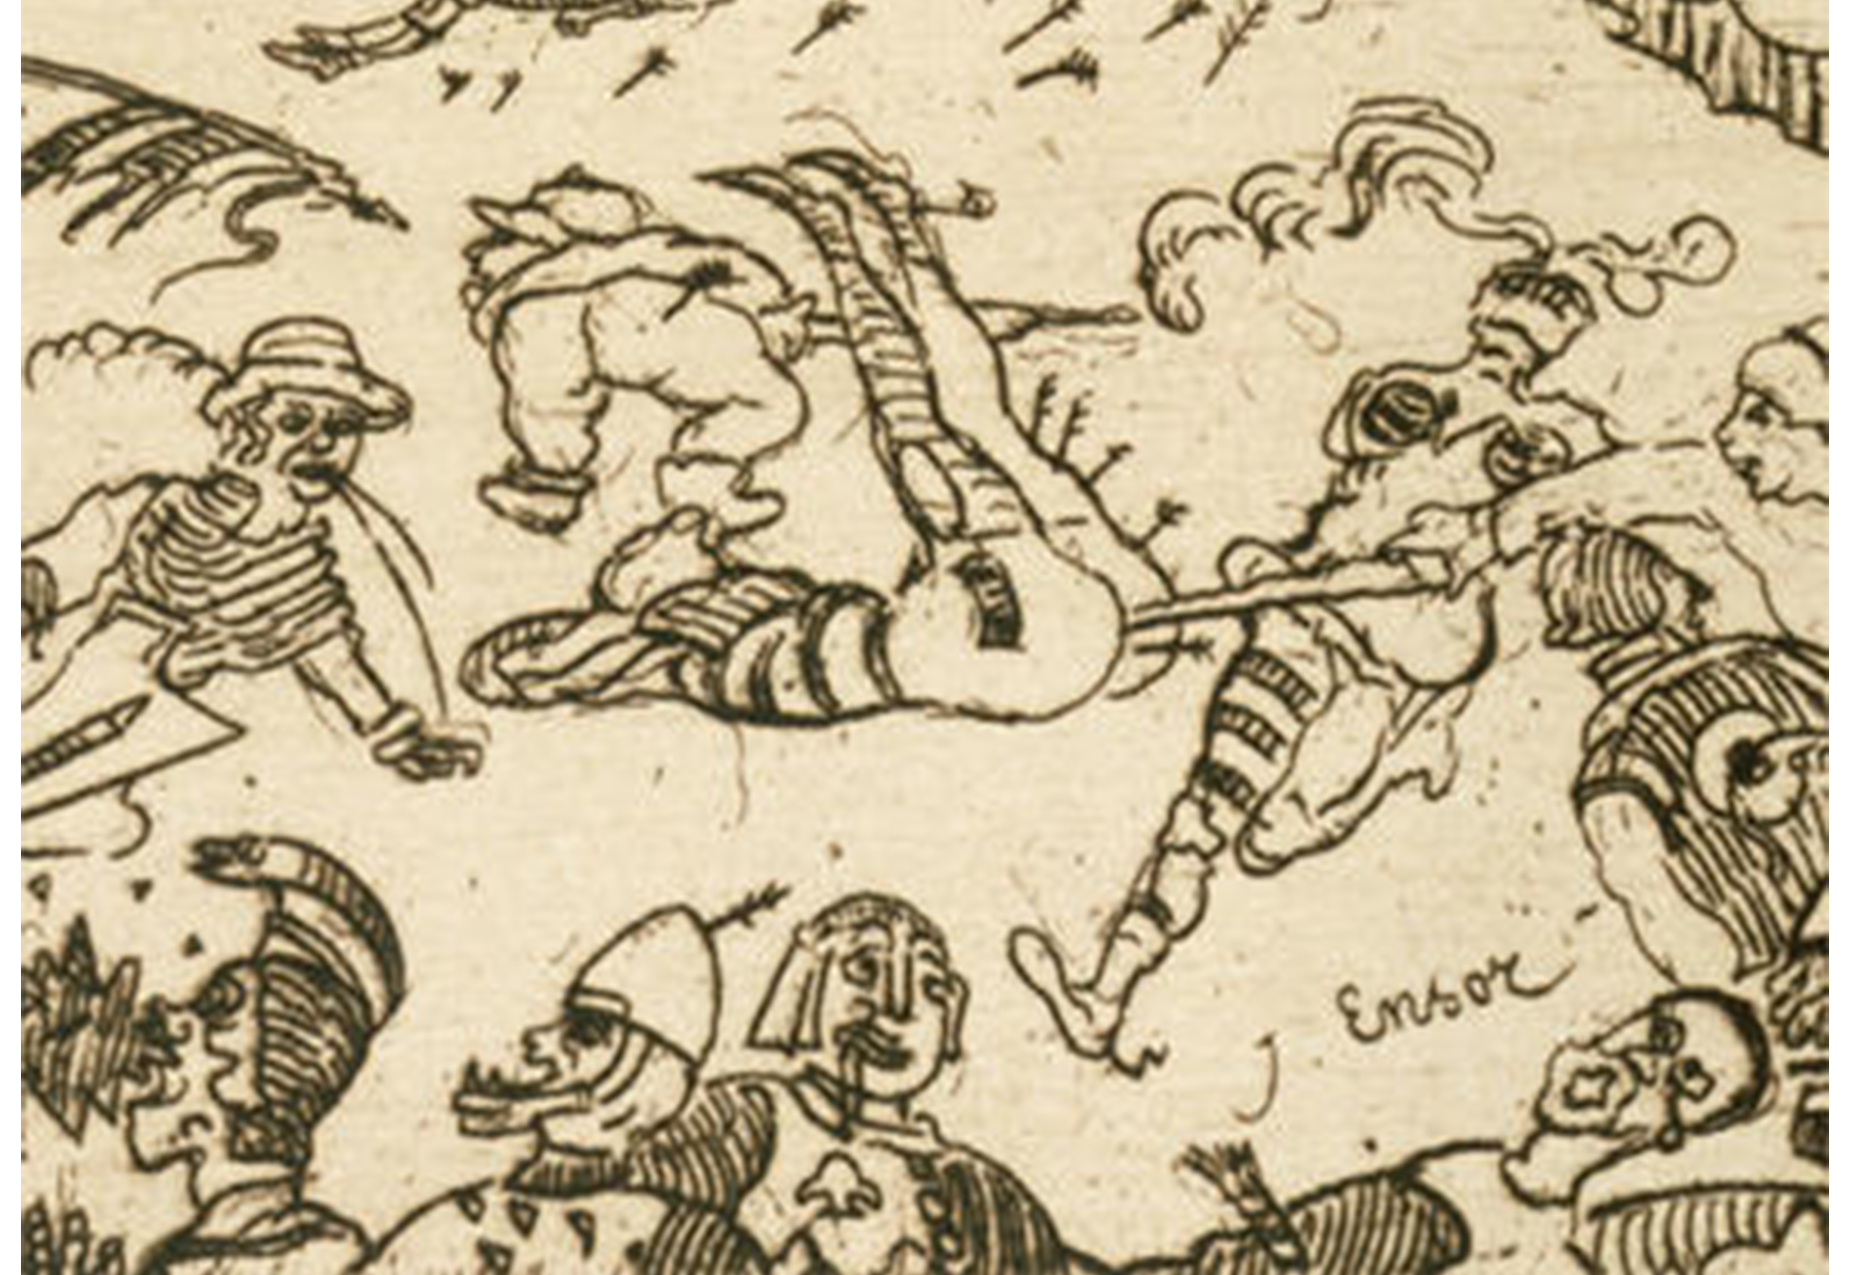 detail of drawing of soldiers lying on the ground after battle